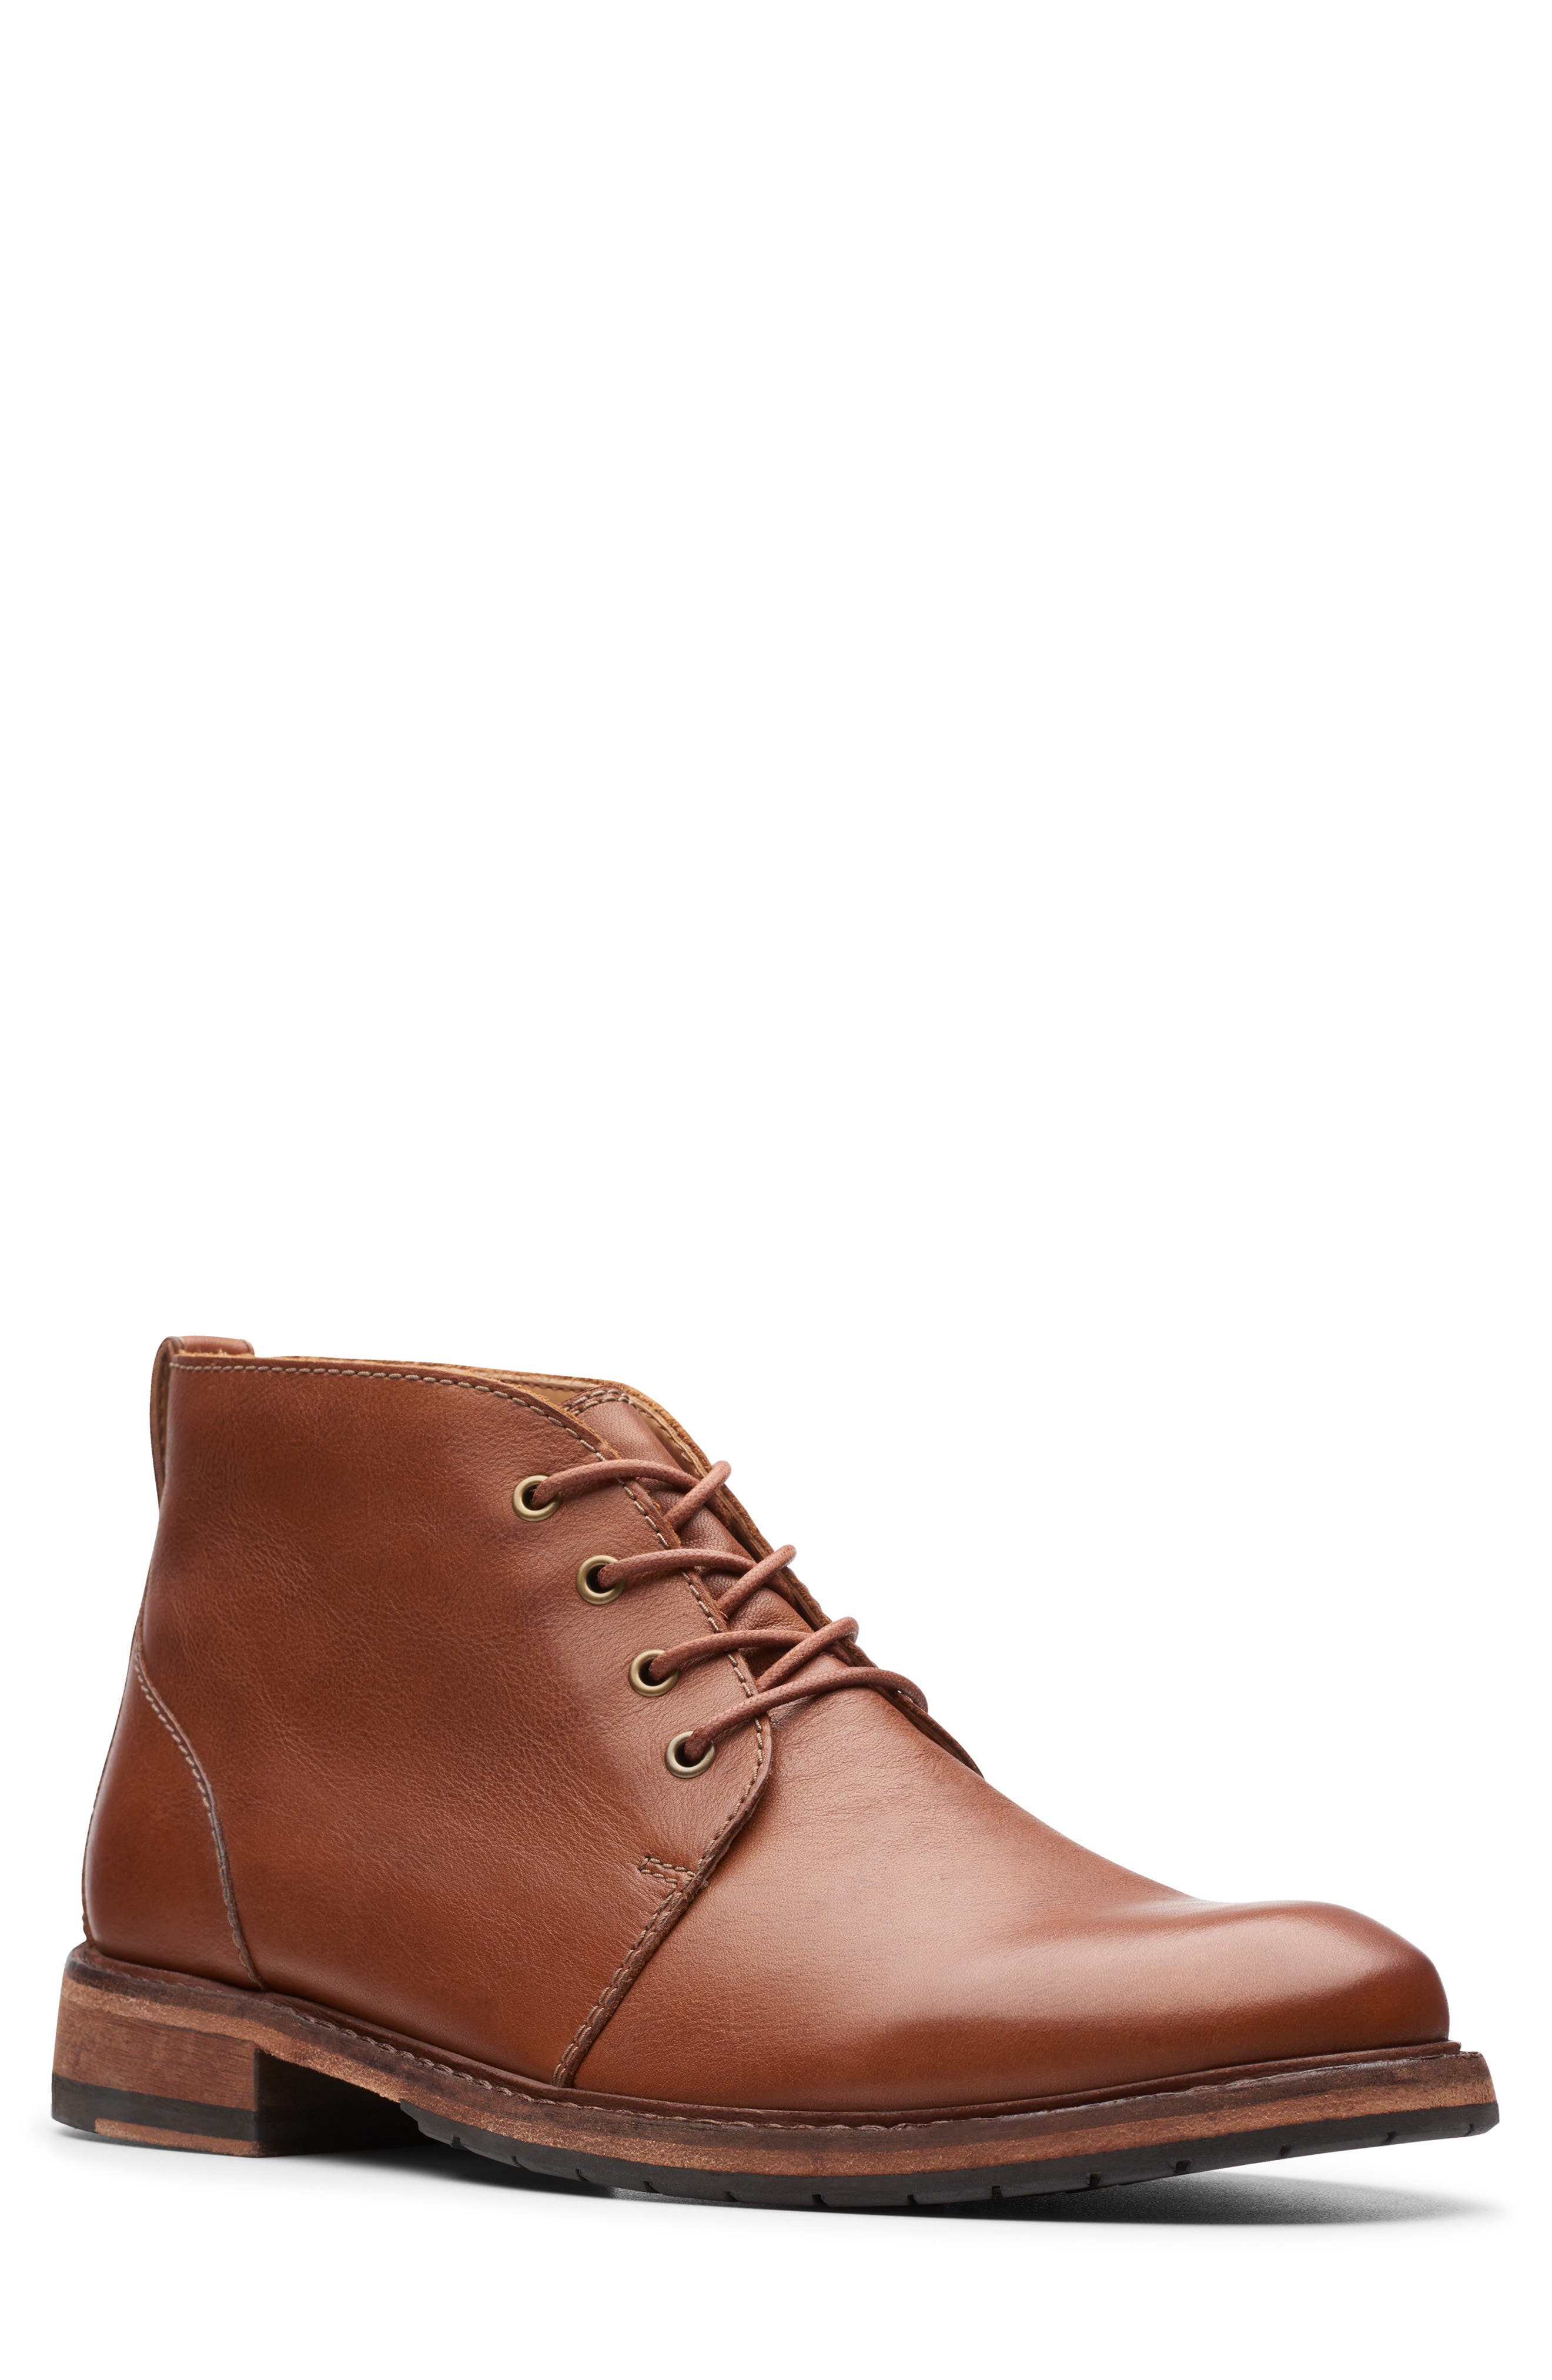 clarks mens boots clearance